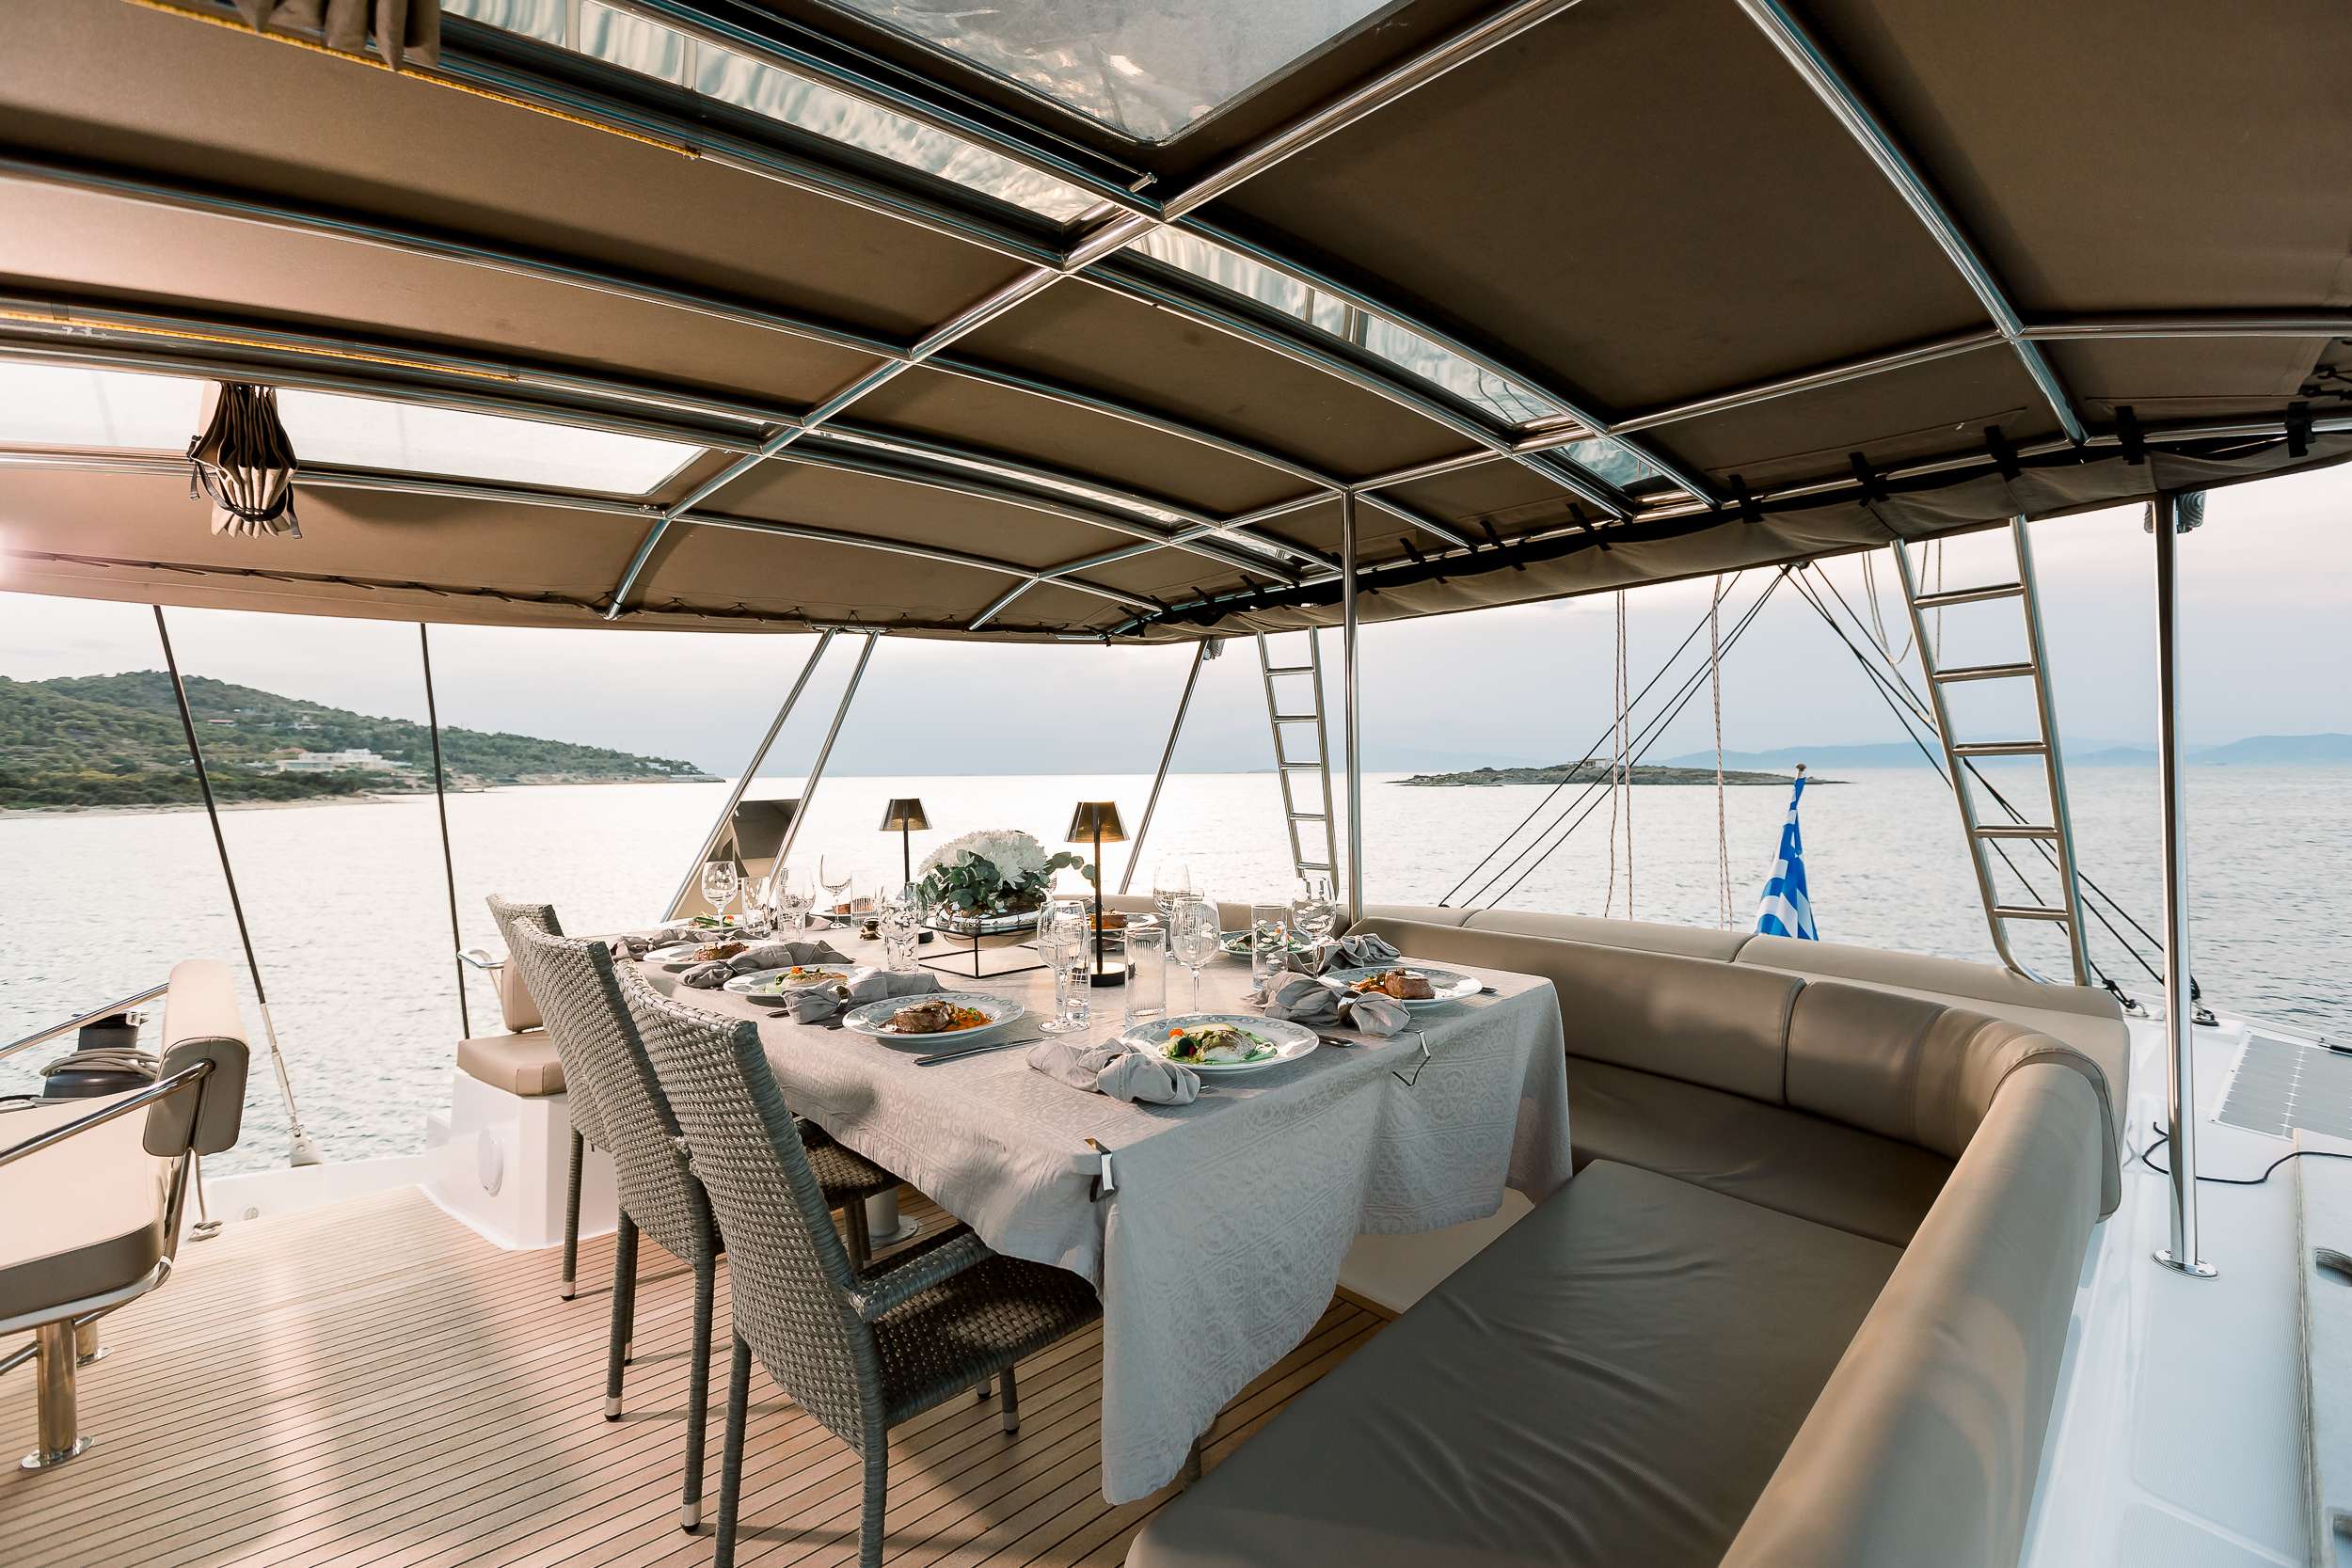 NEW HORIZONS 3 Yacht Charter - Upper Deck Dining Area